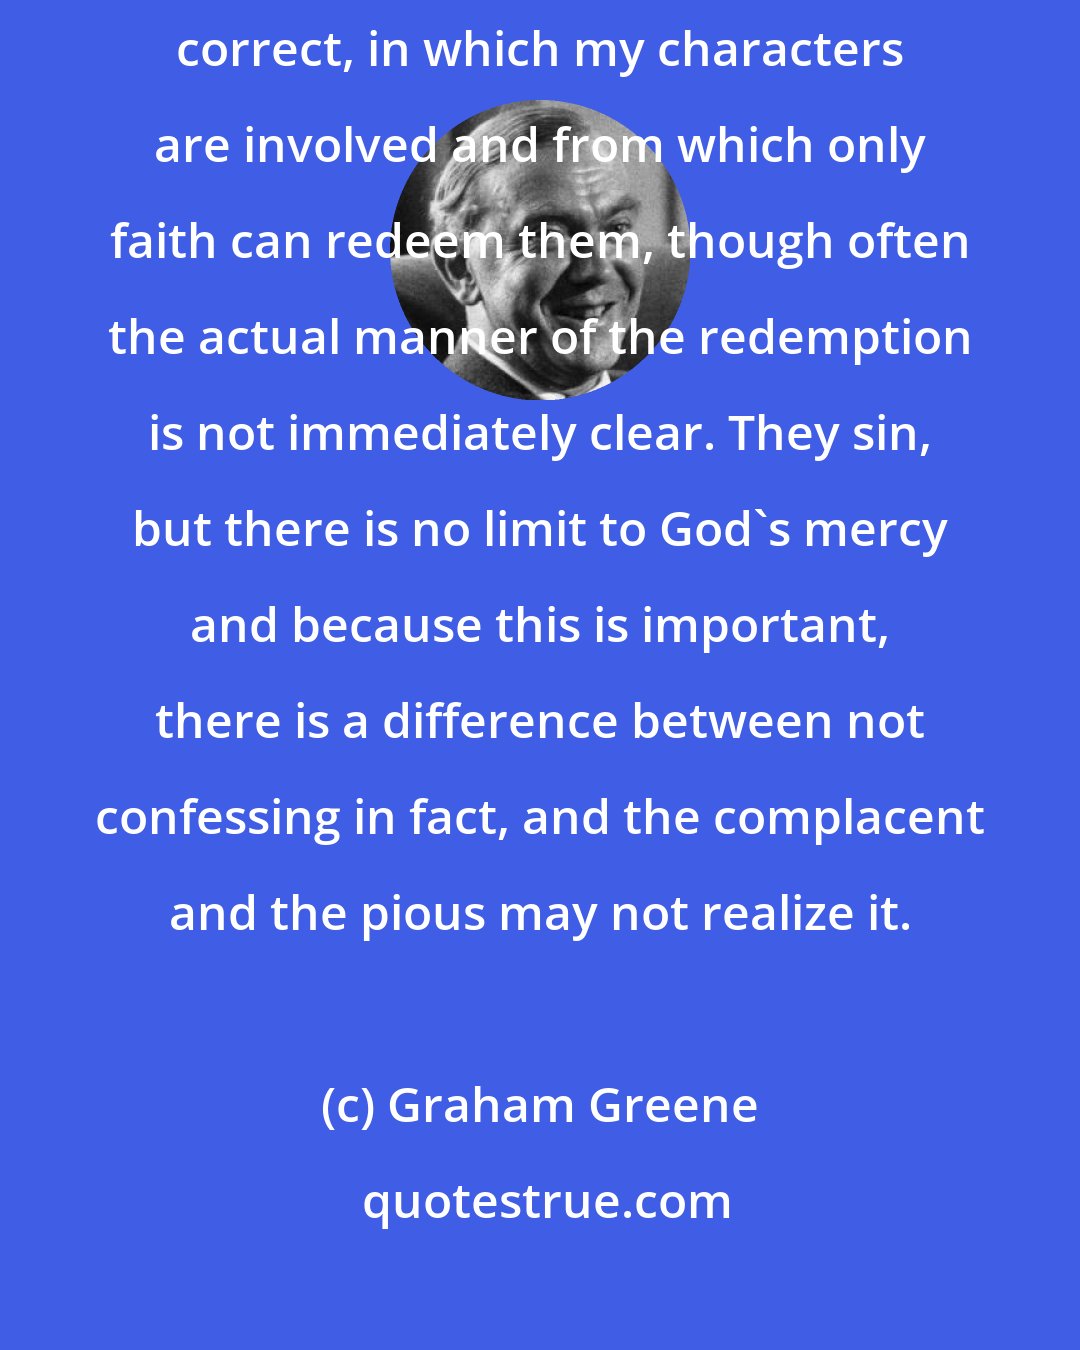 Graham Greene: I write about situations that are common, universal might be more correct, in which my characters are involved and from which only faith can redeem them, though often the actual manner of the redemption is not immediately clear. They sin, but there is no limit to God's mercy and because this is important, there is a difference between not confessing in fact, and the complacent and the pious may not realize it.